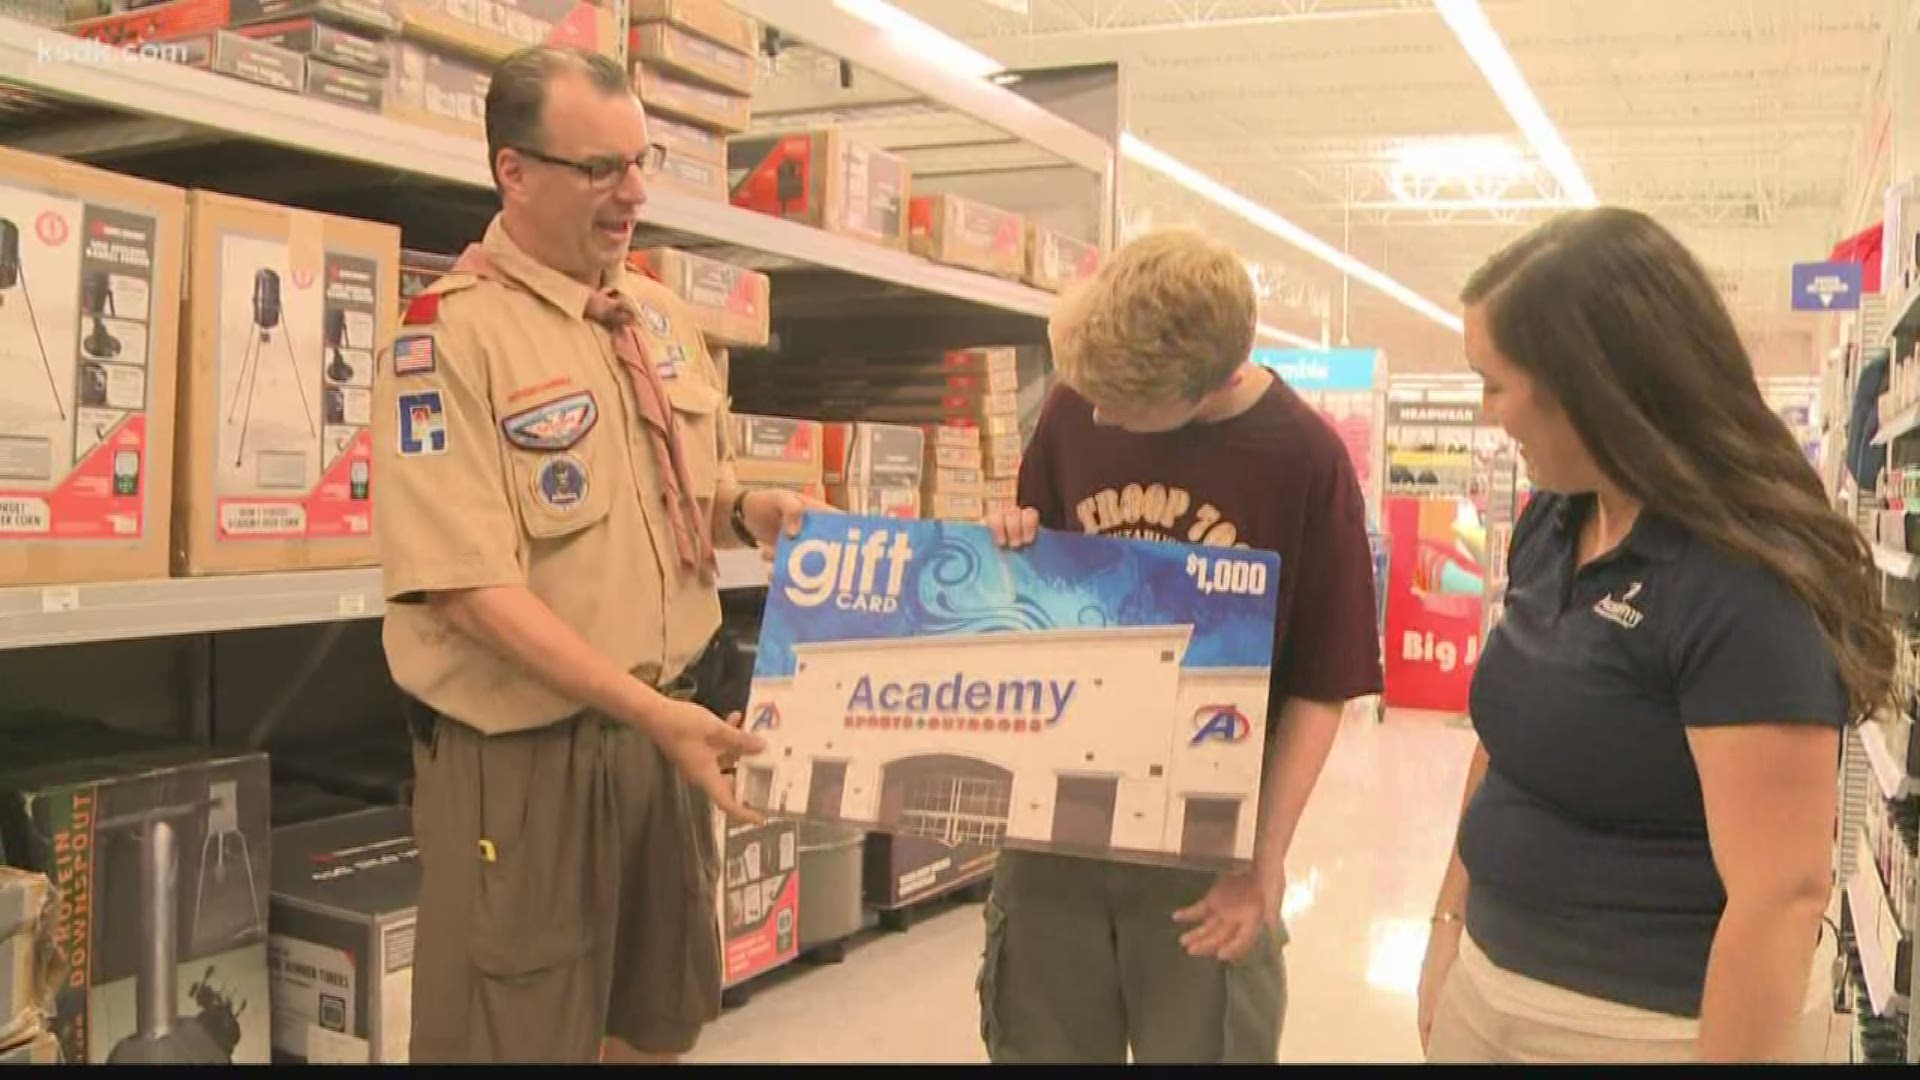 Boy scouts that had its trailer stolen with all its camping gear inside is getting some help from the community.